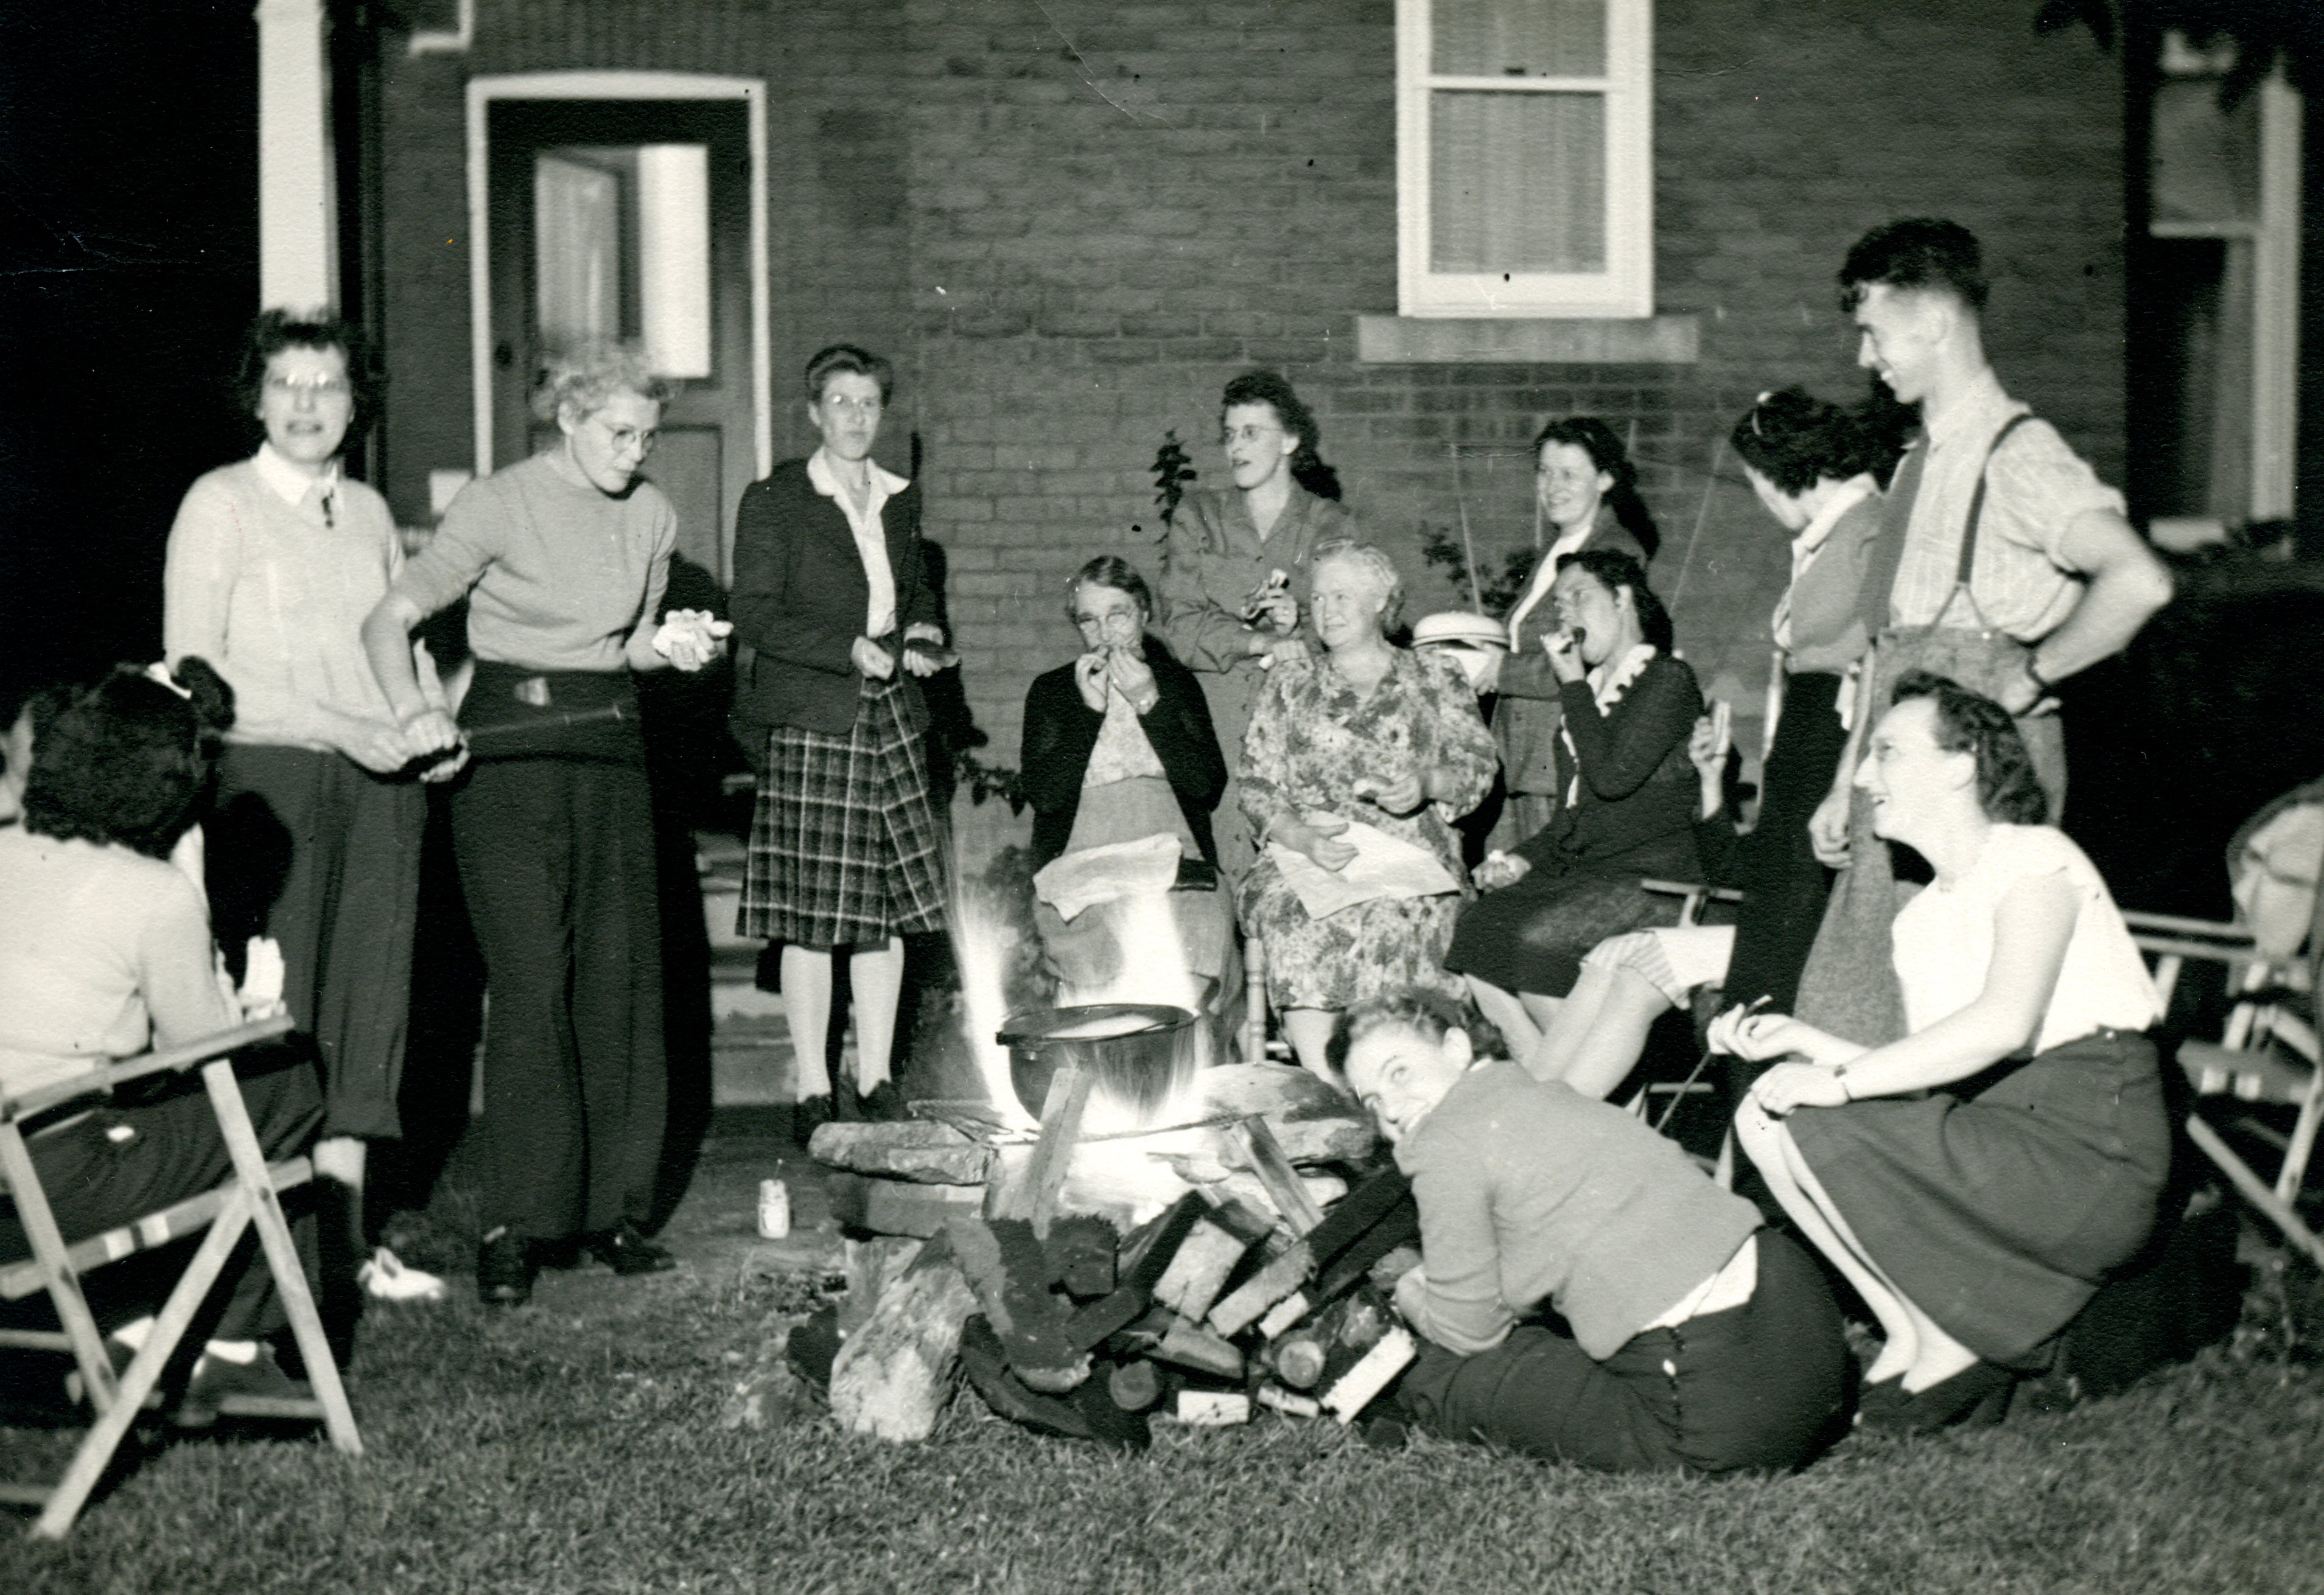 Thirteen people gather around a fire, eating corn. They are in front of a brick building.